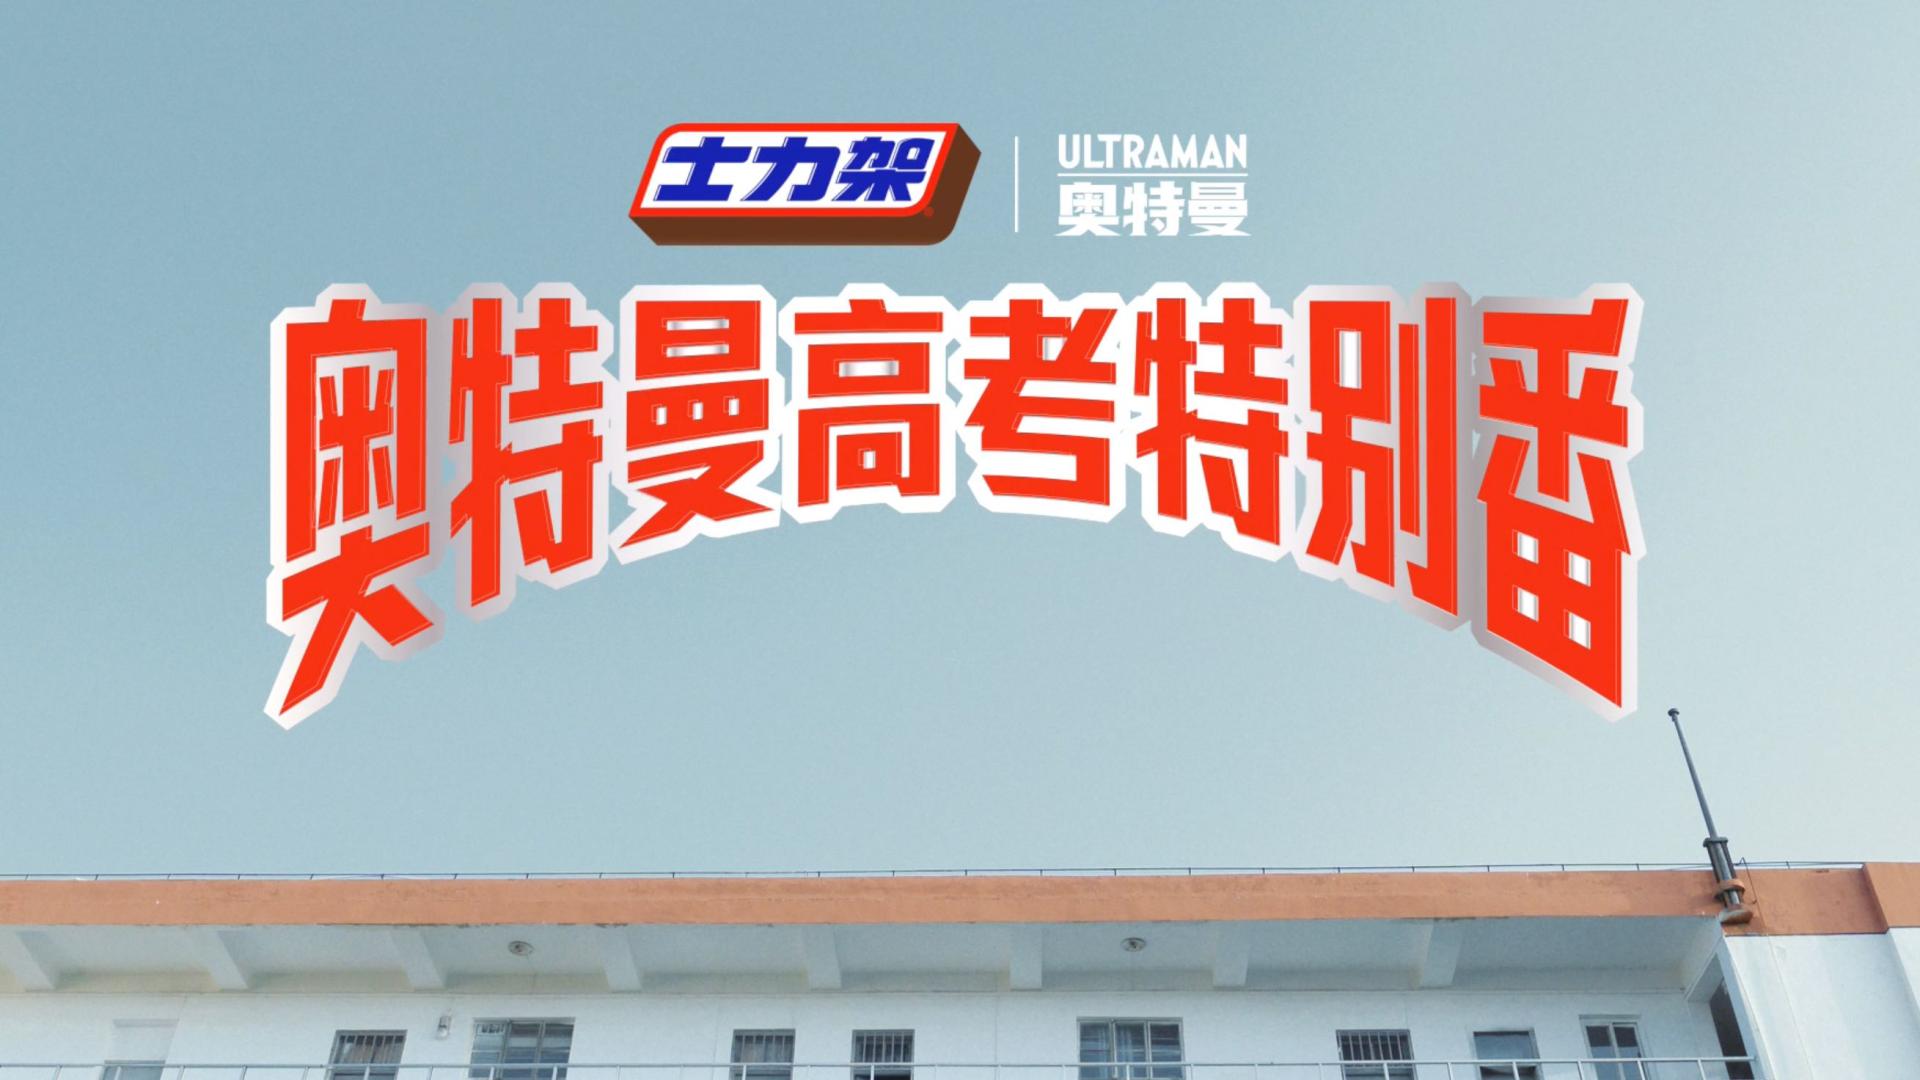 SNICKERS X 奥特曼_80s_Dir